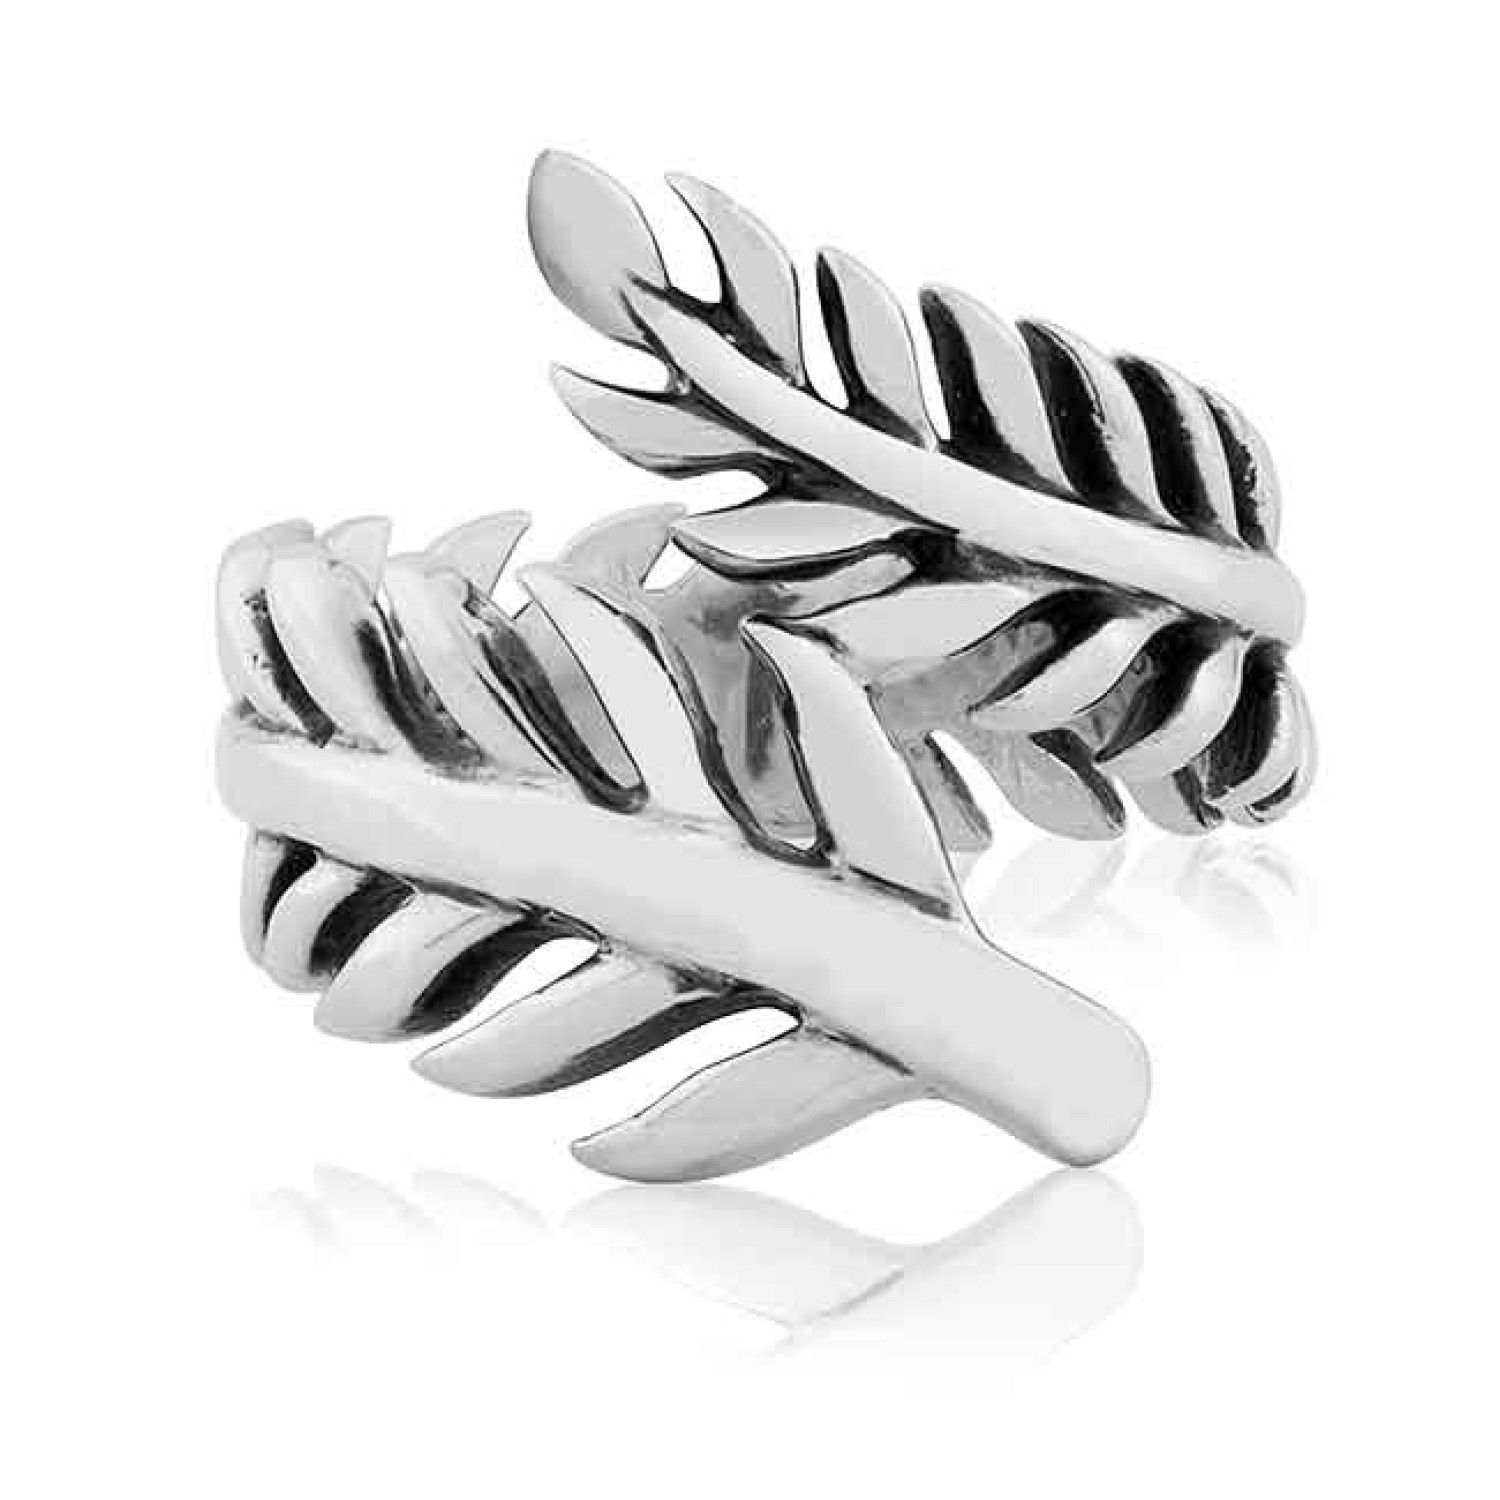 Evolve Silver Fern Ring. The silver fern is widely used as a symbol by New Zealand national sports teams in various stylised forms. Silver Ferns is the name of the national netball team, and most other national womens sports teams have n @christies.online